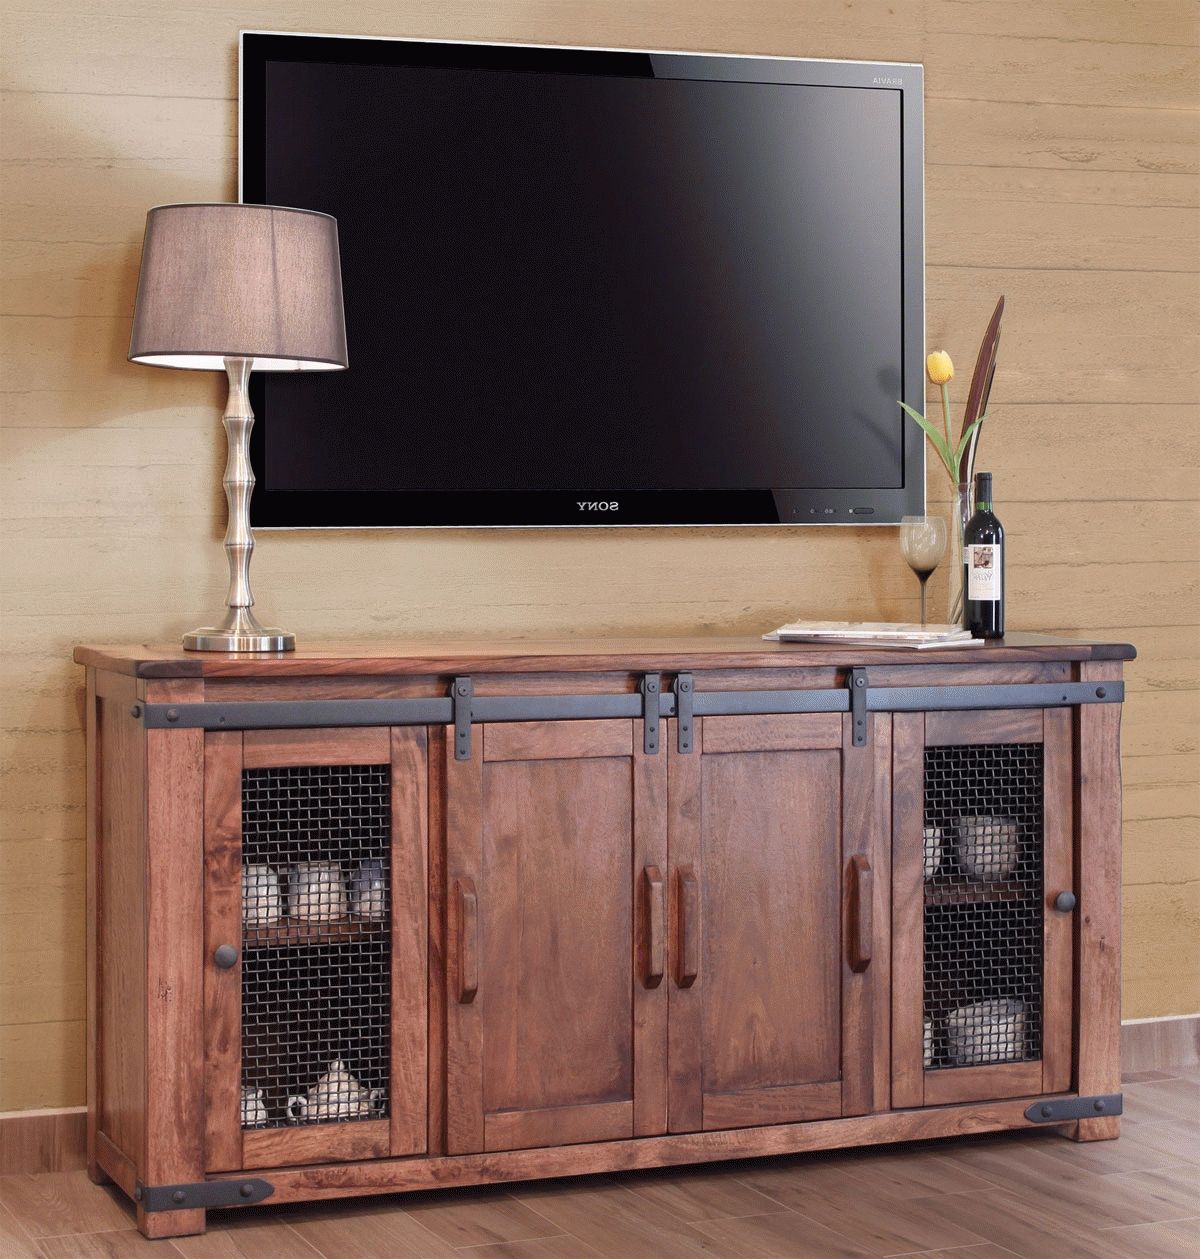 Rustic Tv Stand, Wood Tv Stand, Pine Tv Stand For Rustic Pine Tv Cabinets (Gallery 3 of 20)